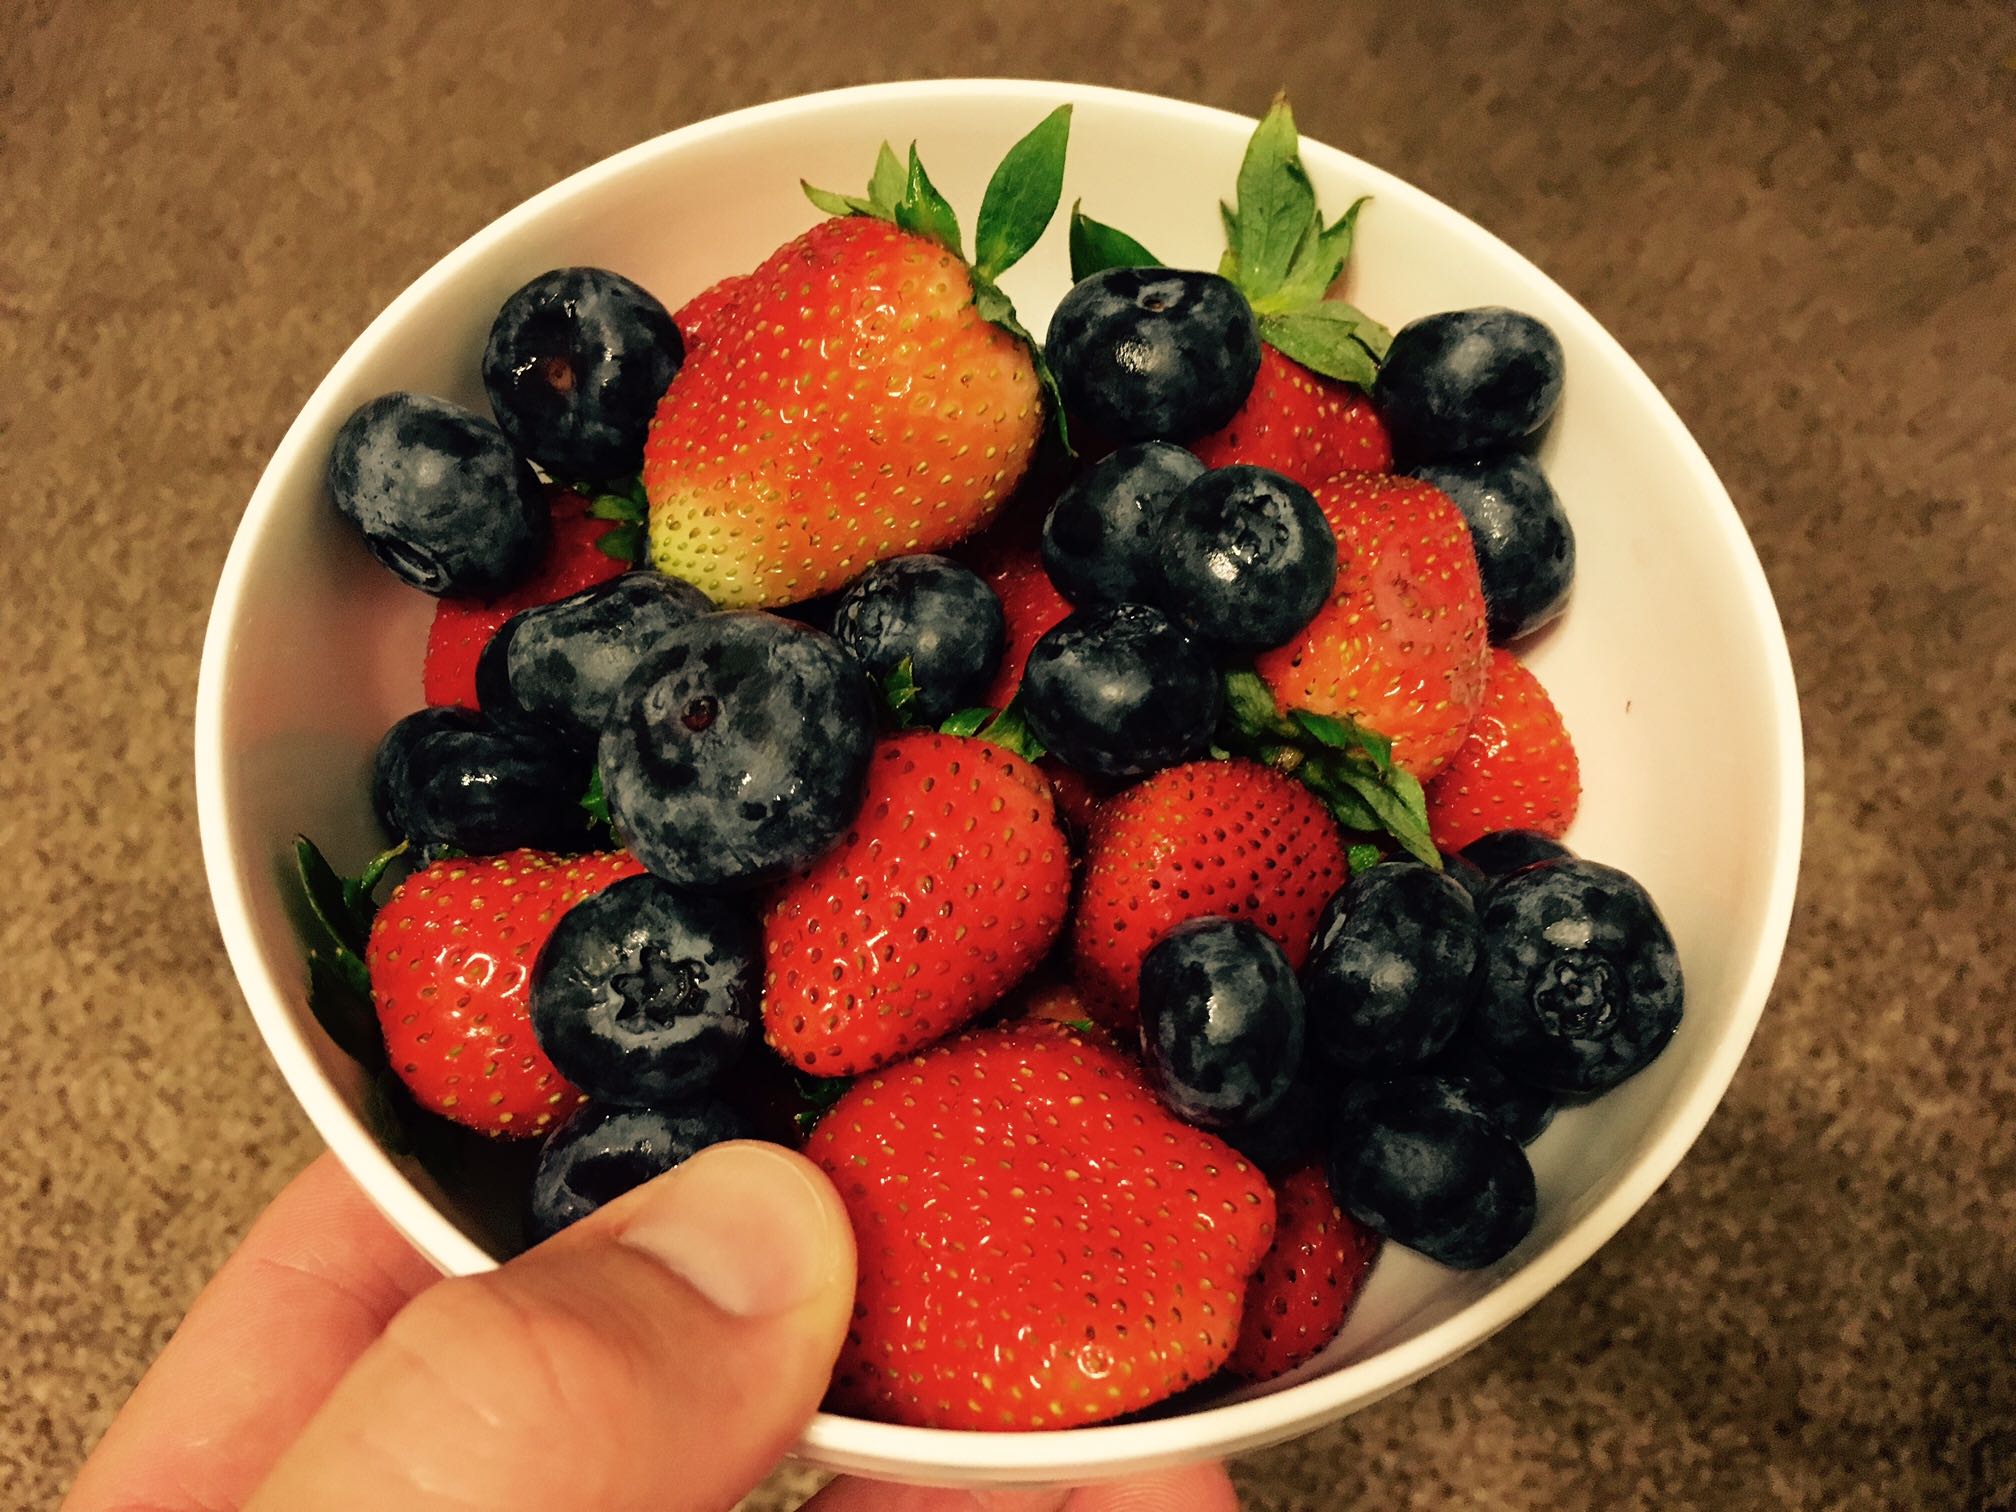 Plant-based bodybuilding champ Robert Cheeke holds a bowl of mixed berries, including blueberries and strawberries